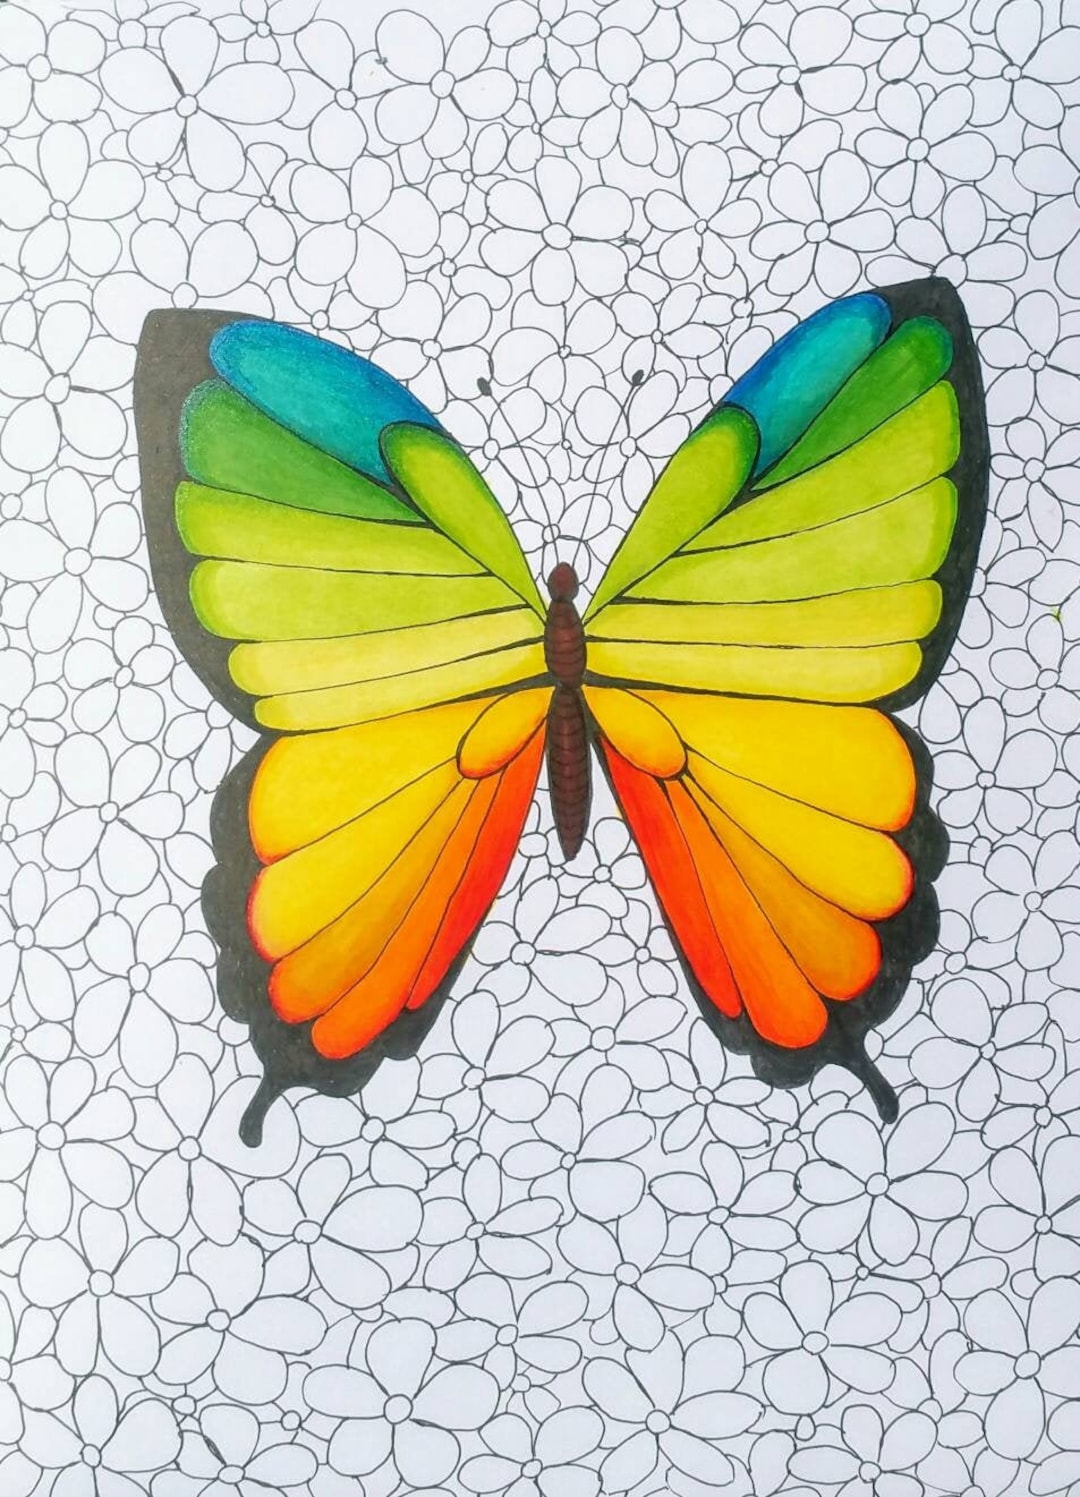 Butterfly makeing by colour pencils - Art_official_003 - Paintings &  Prints, Animals, Birds, & Fish, Other Animals, Birds, & Fish - ArtPal